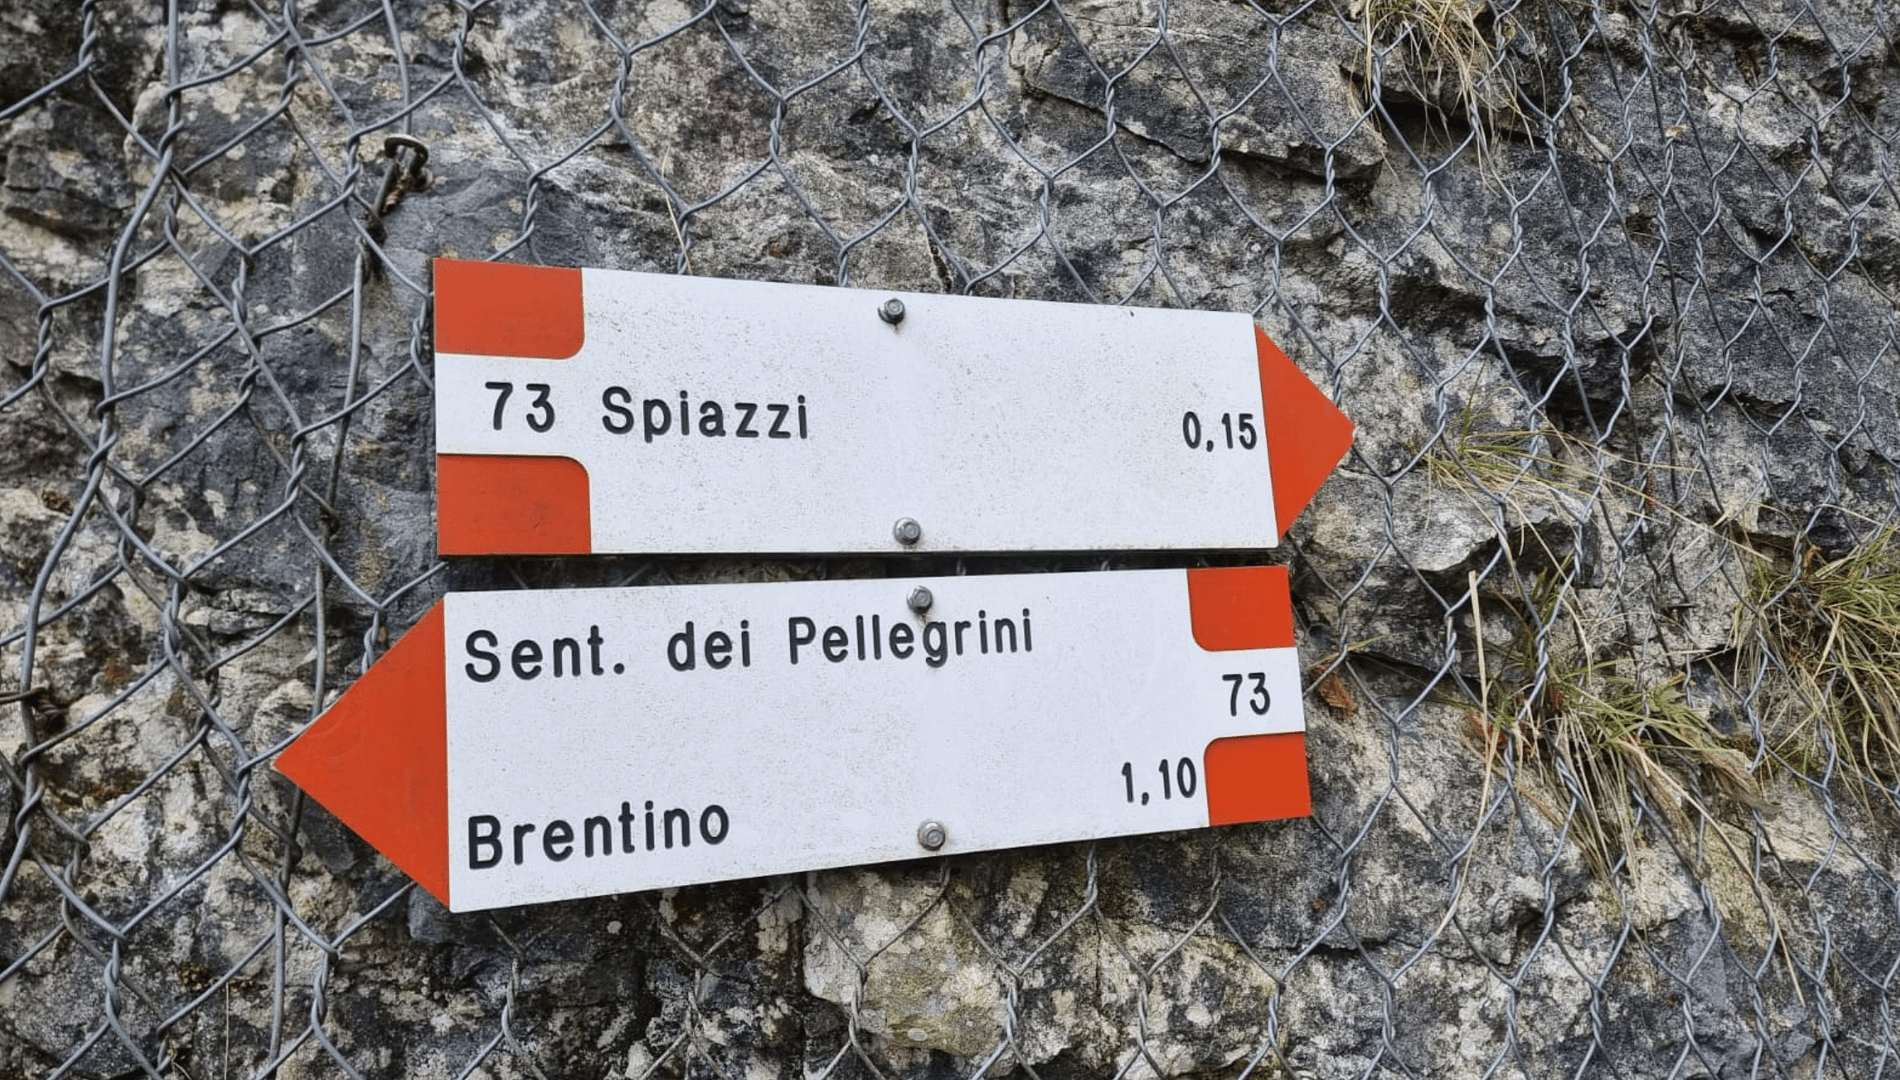 how to get to the shrine of madonna della corona - road sign with distance from Spiazzi and Brentino